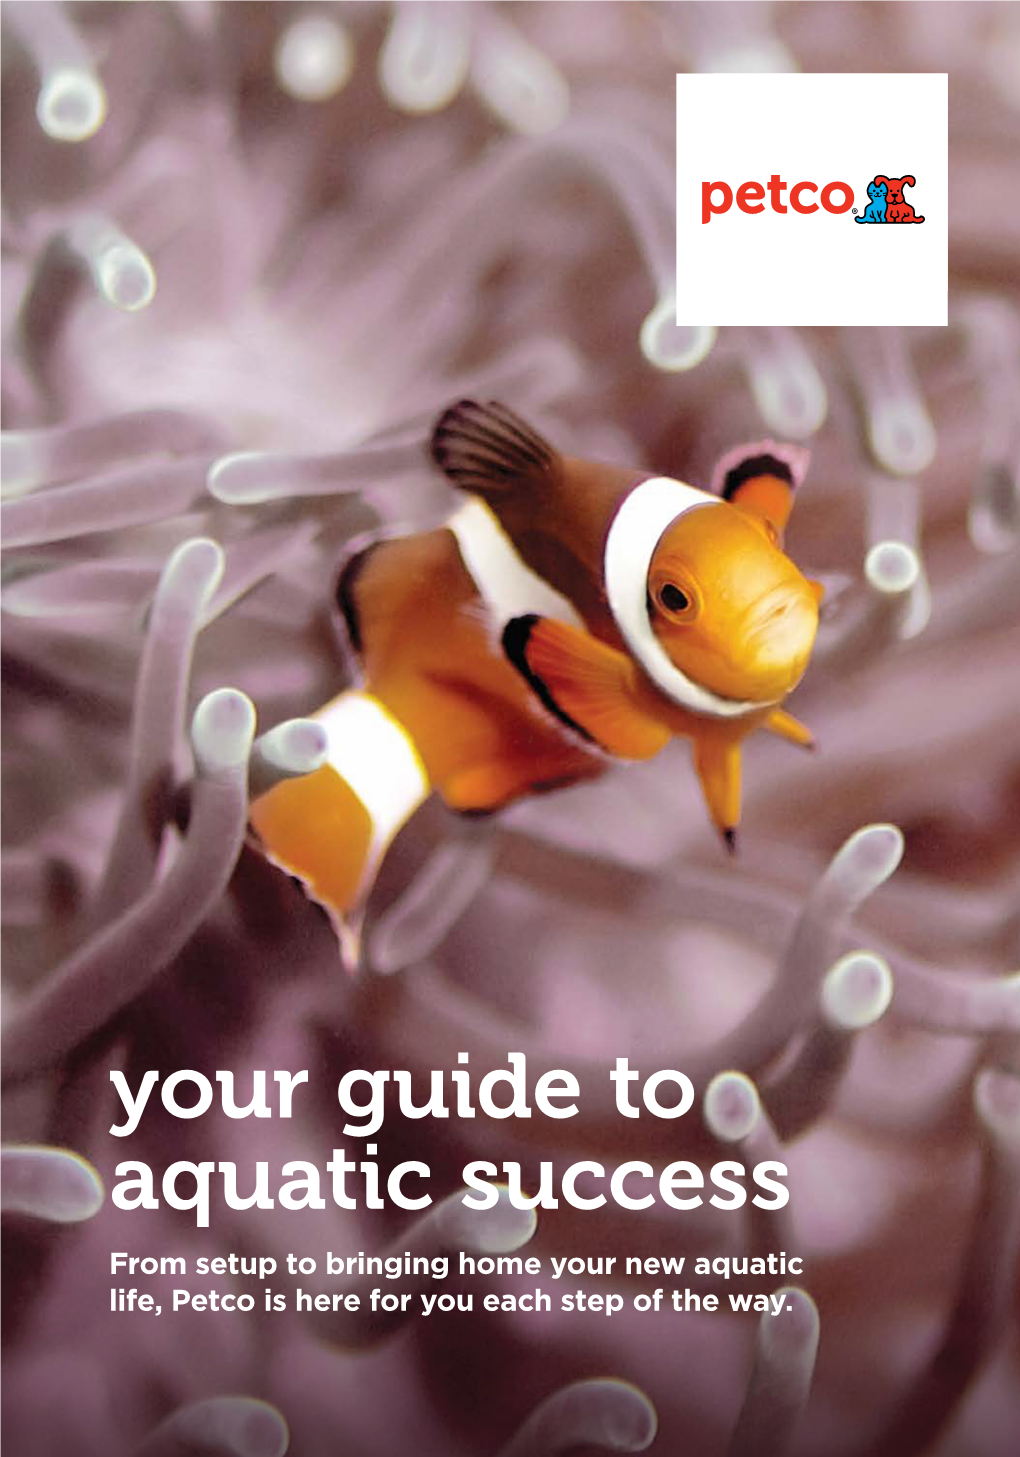 Your Guide to Aquatic Success from Setup to Bringing Home Your New Aquatic Life, Petco Is Here for You Each Step of the Way